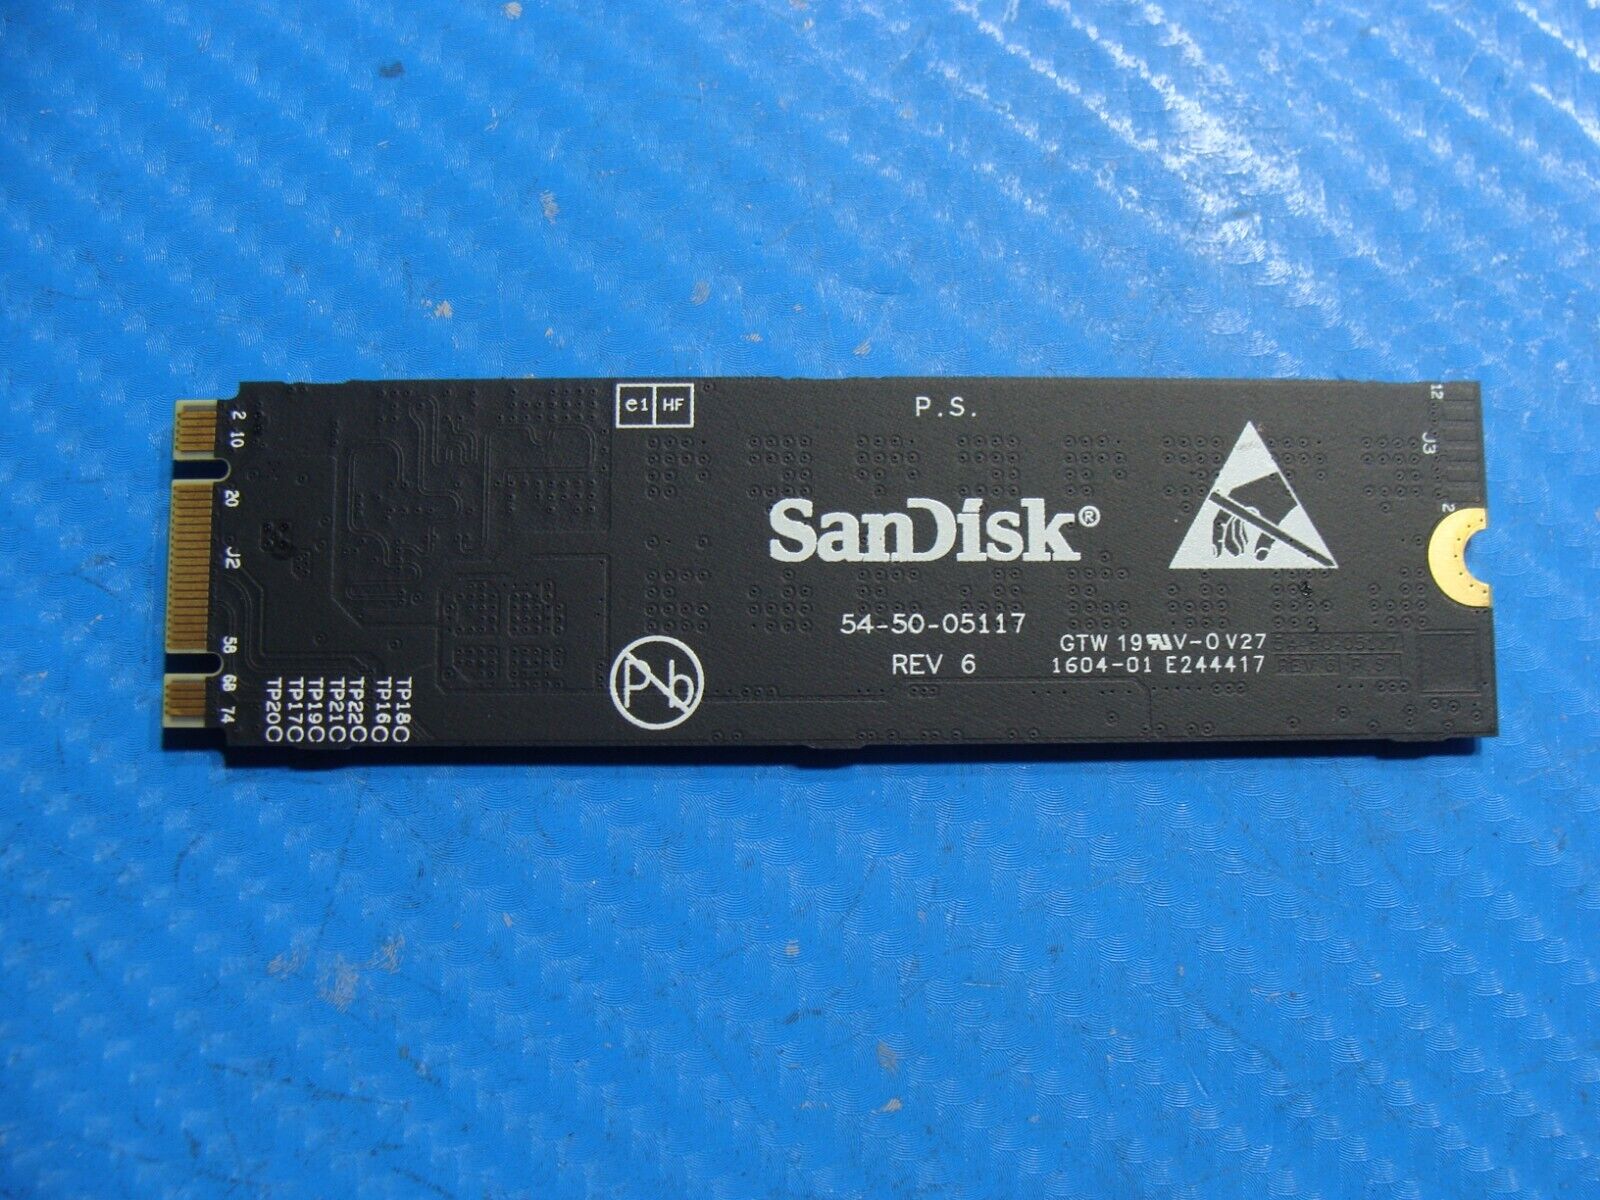 HP x360 310 G2 SanDisk 128Gb Sata M.2 SSD Solid State Drive SD7SN6S- 128G-1006